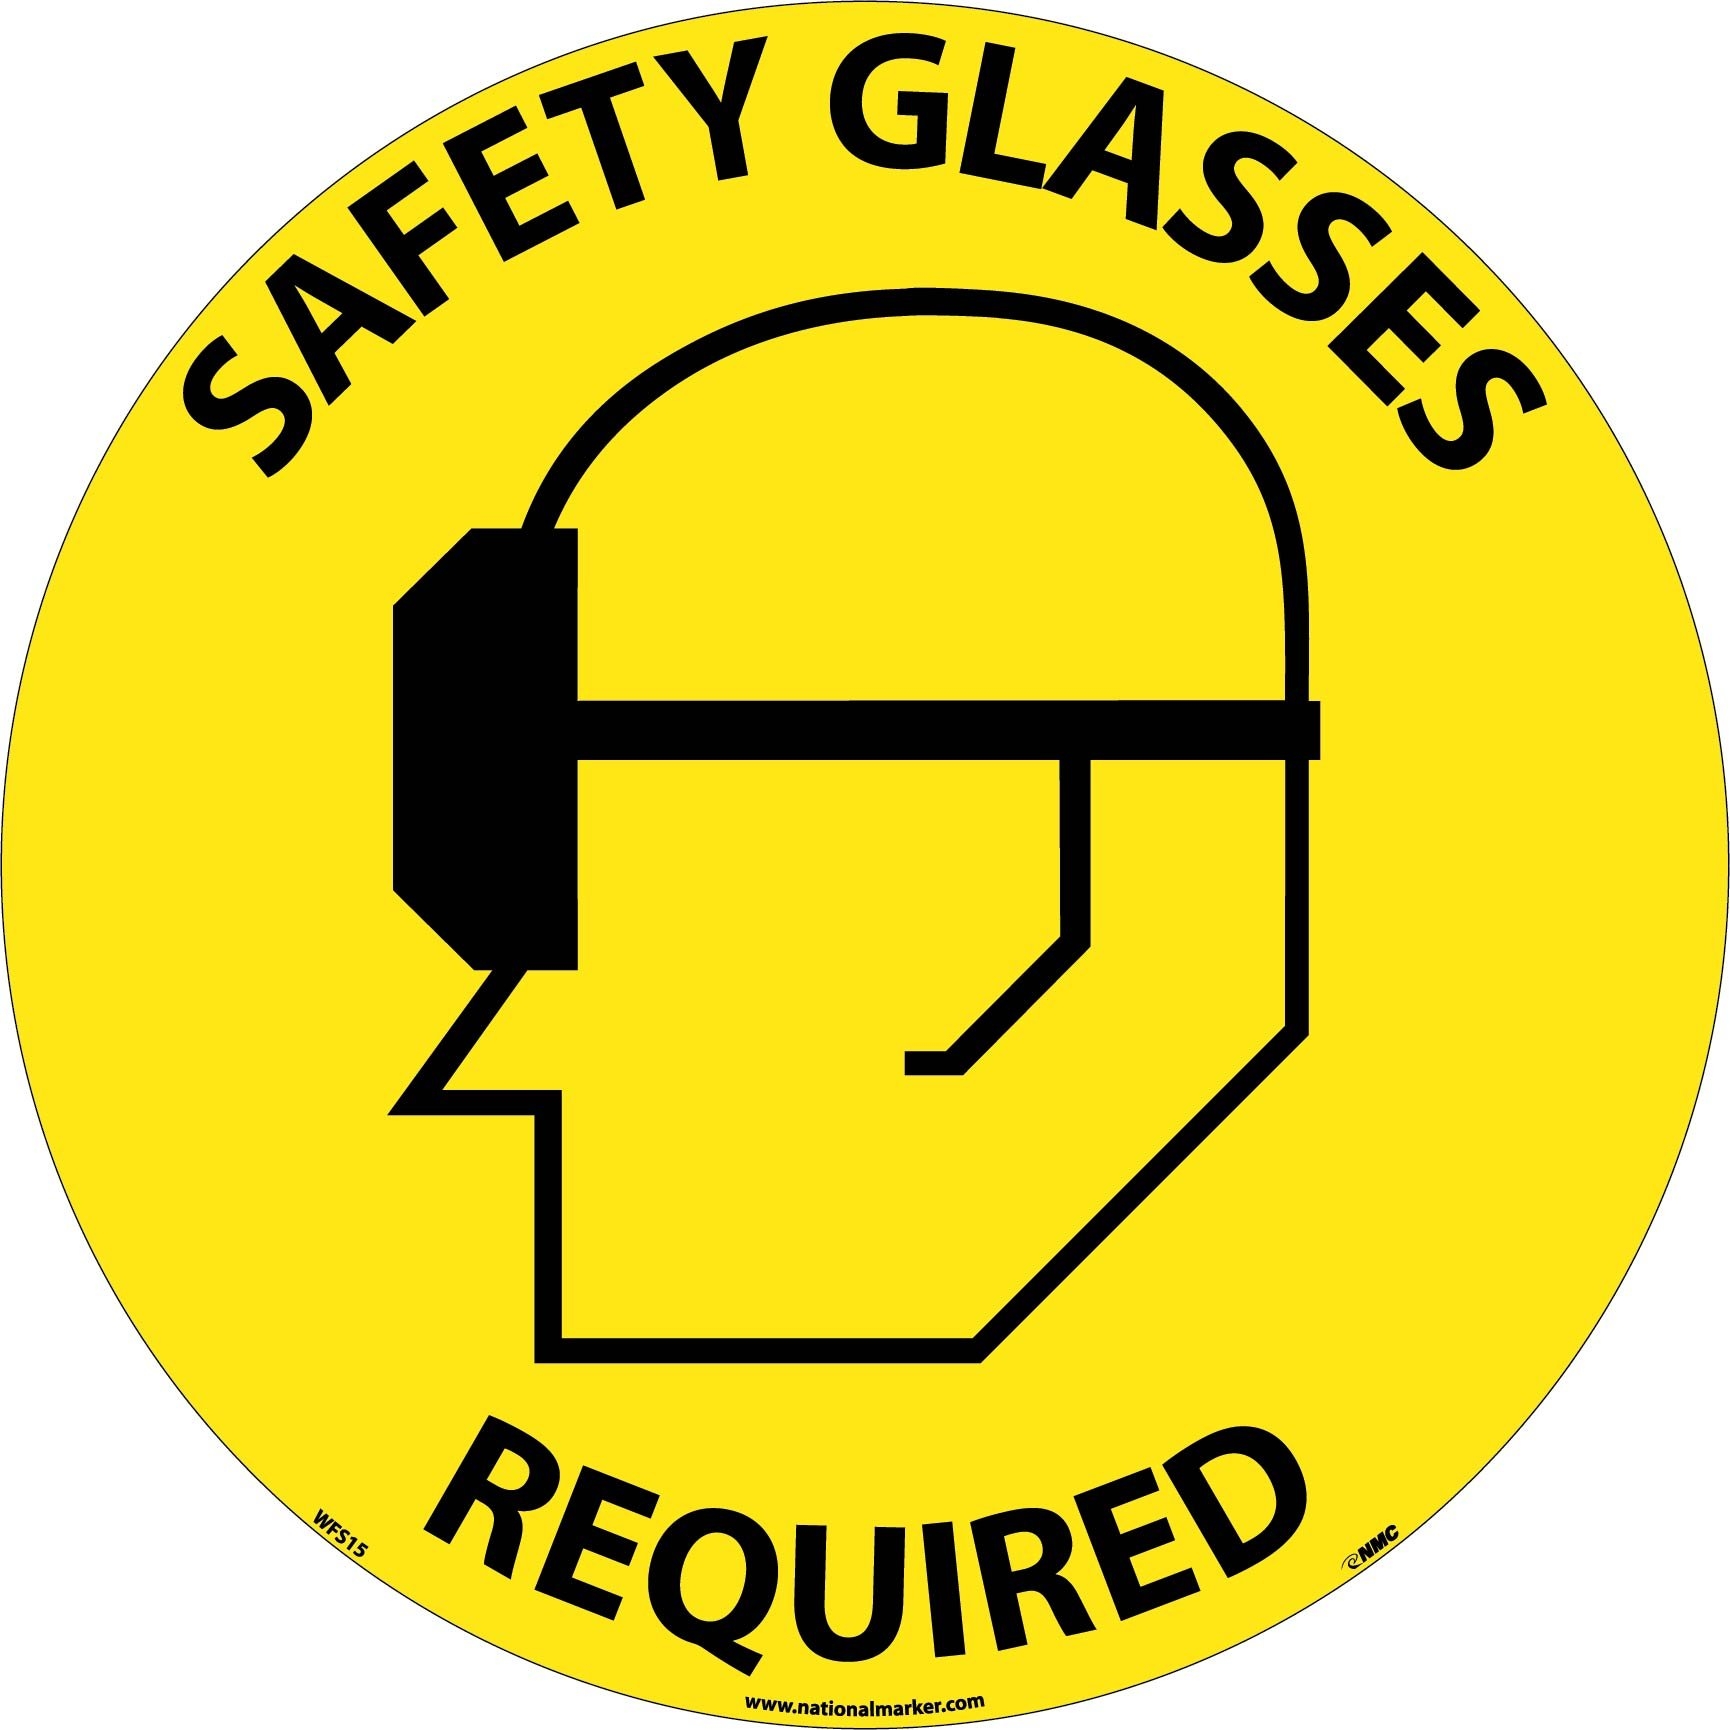 printable-lab-safety-pictures-clipart-best